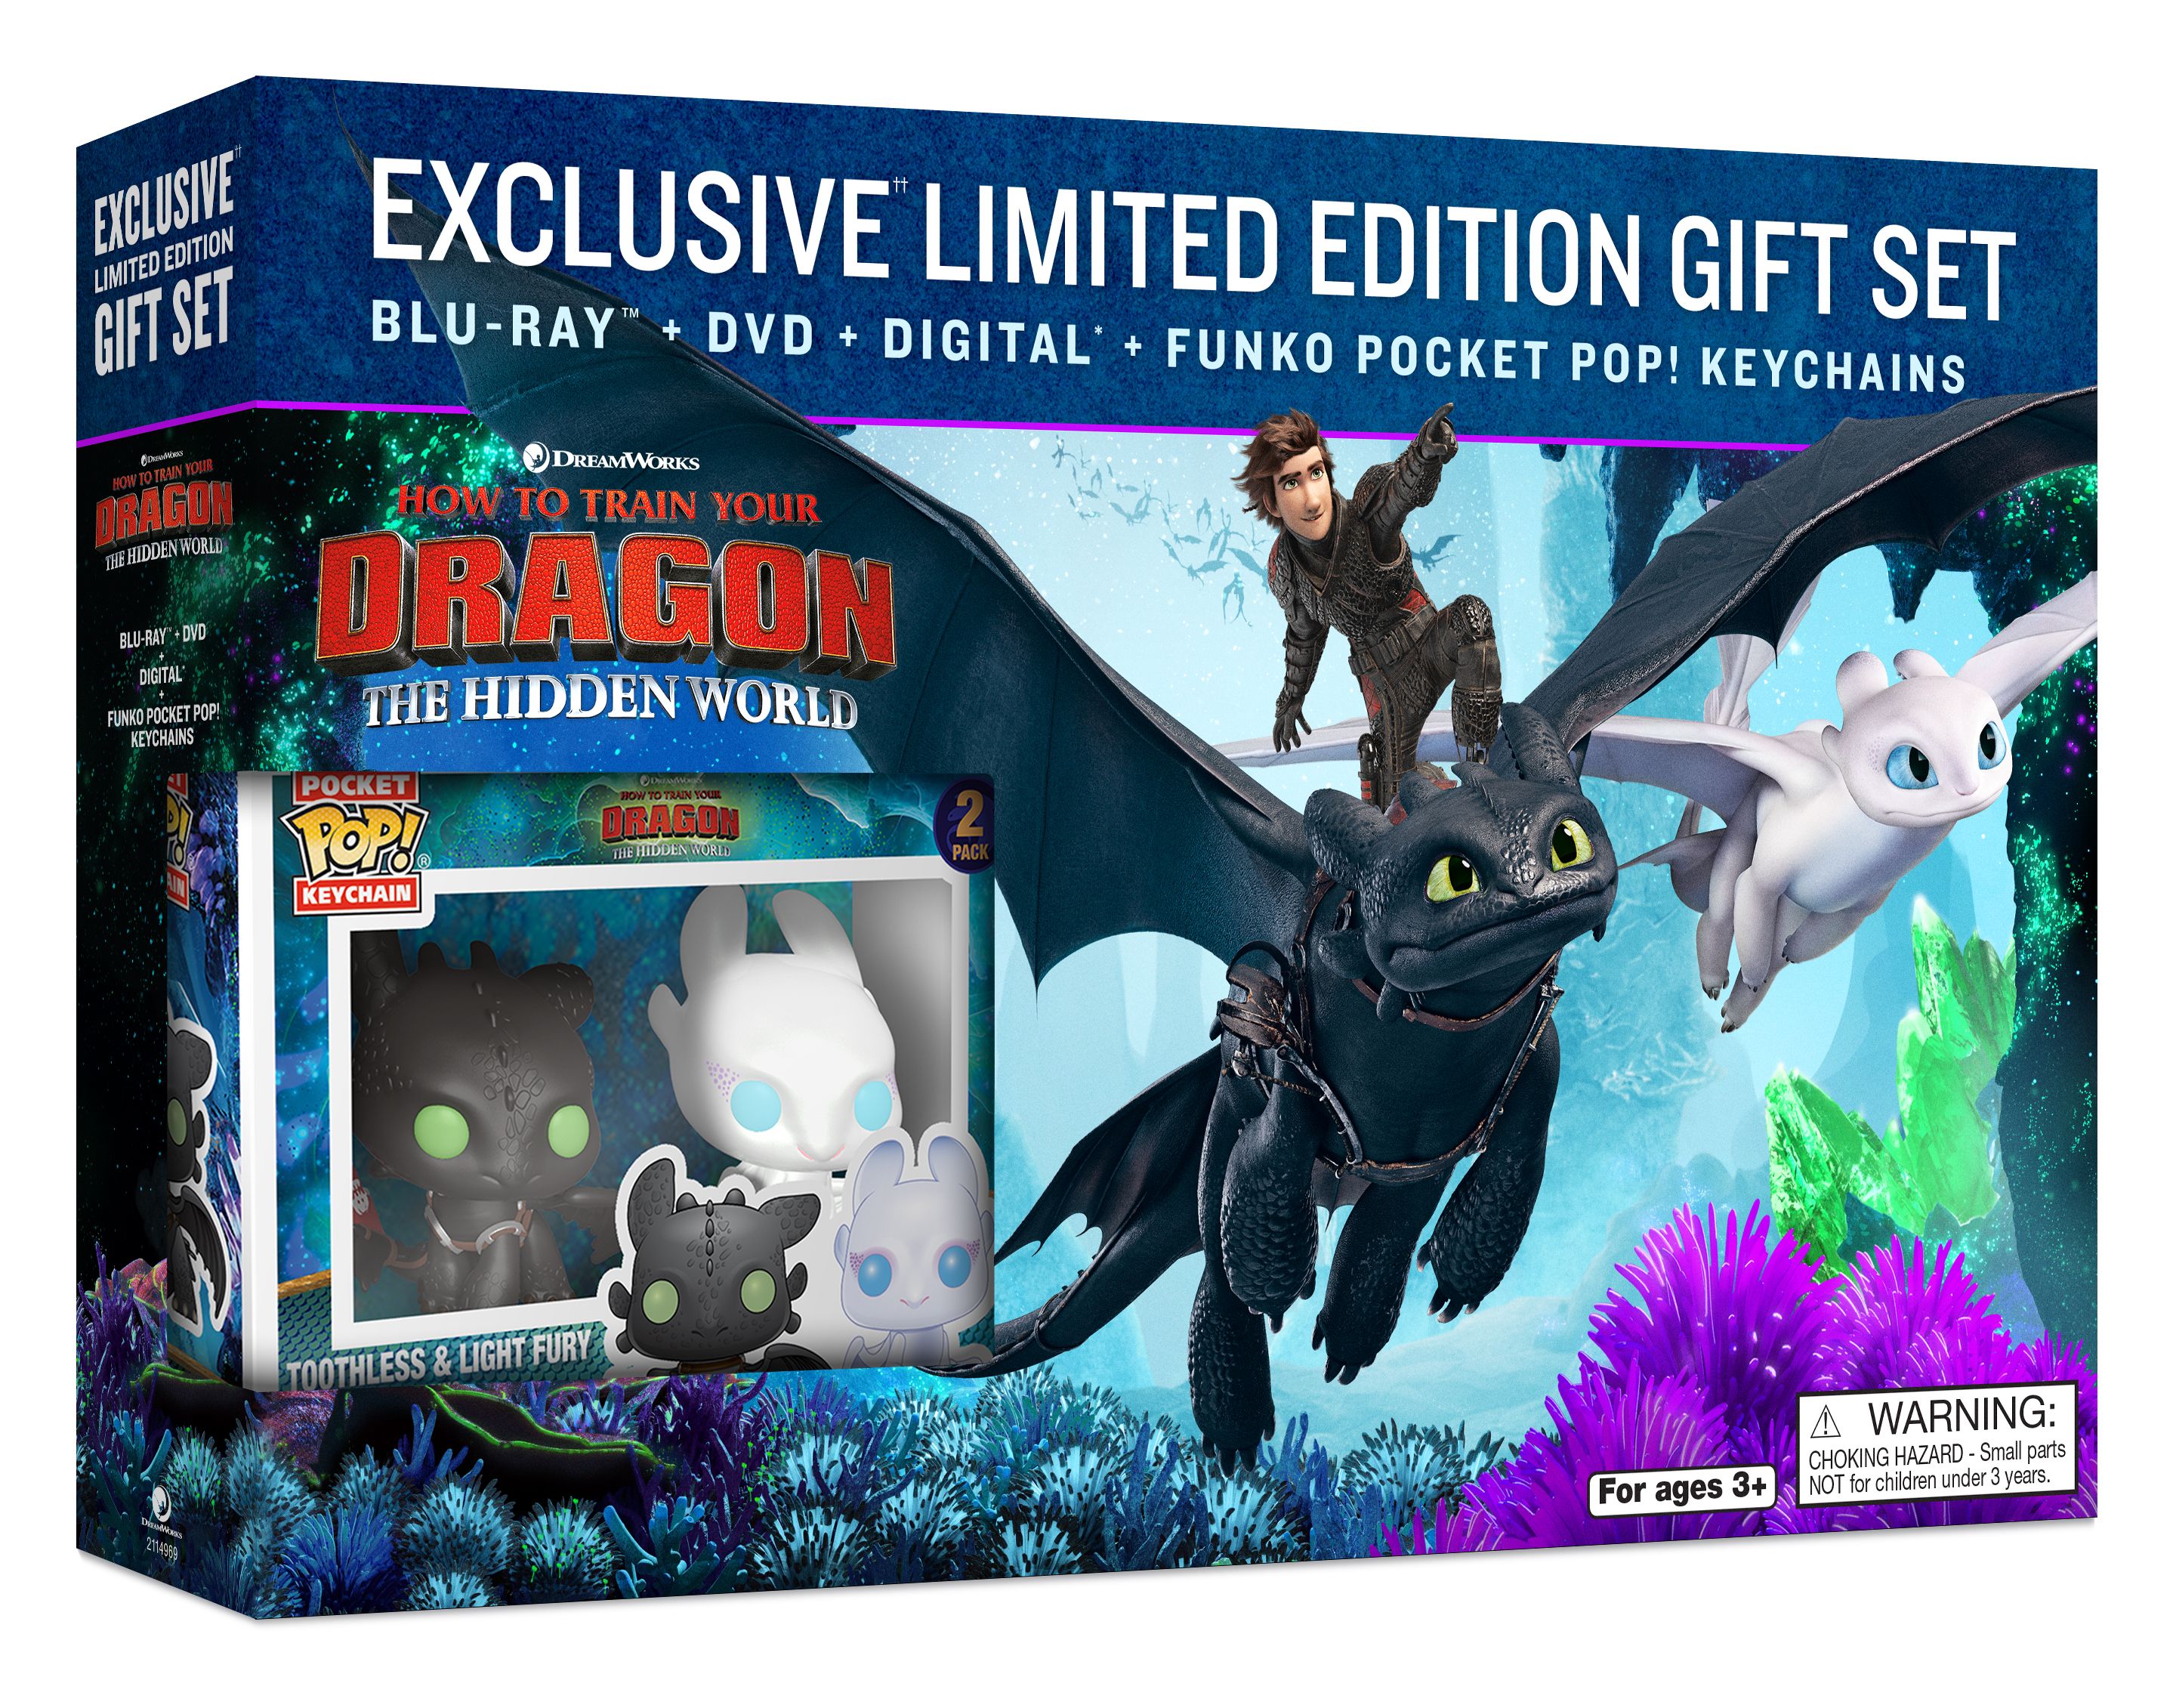 How To Train Your Dragon 3 (Blu-ray) (Walmart Exclusive) - image 3 of 3